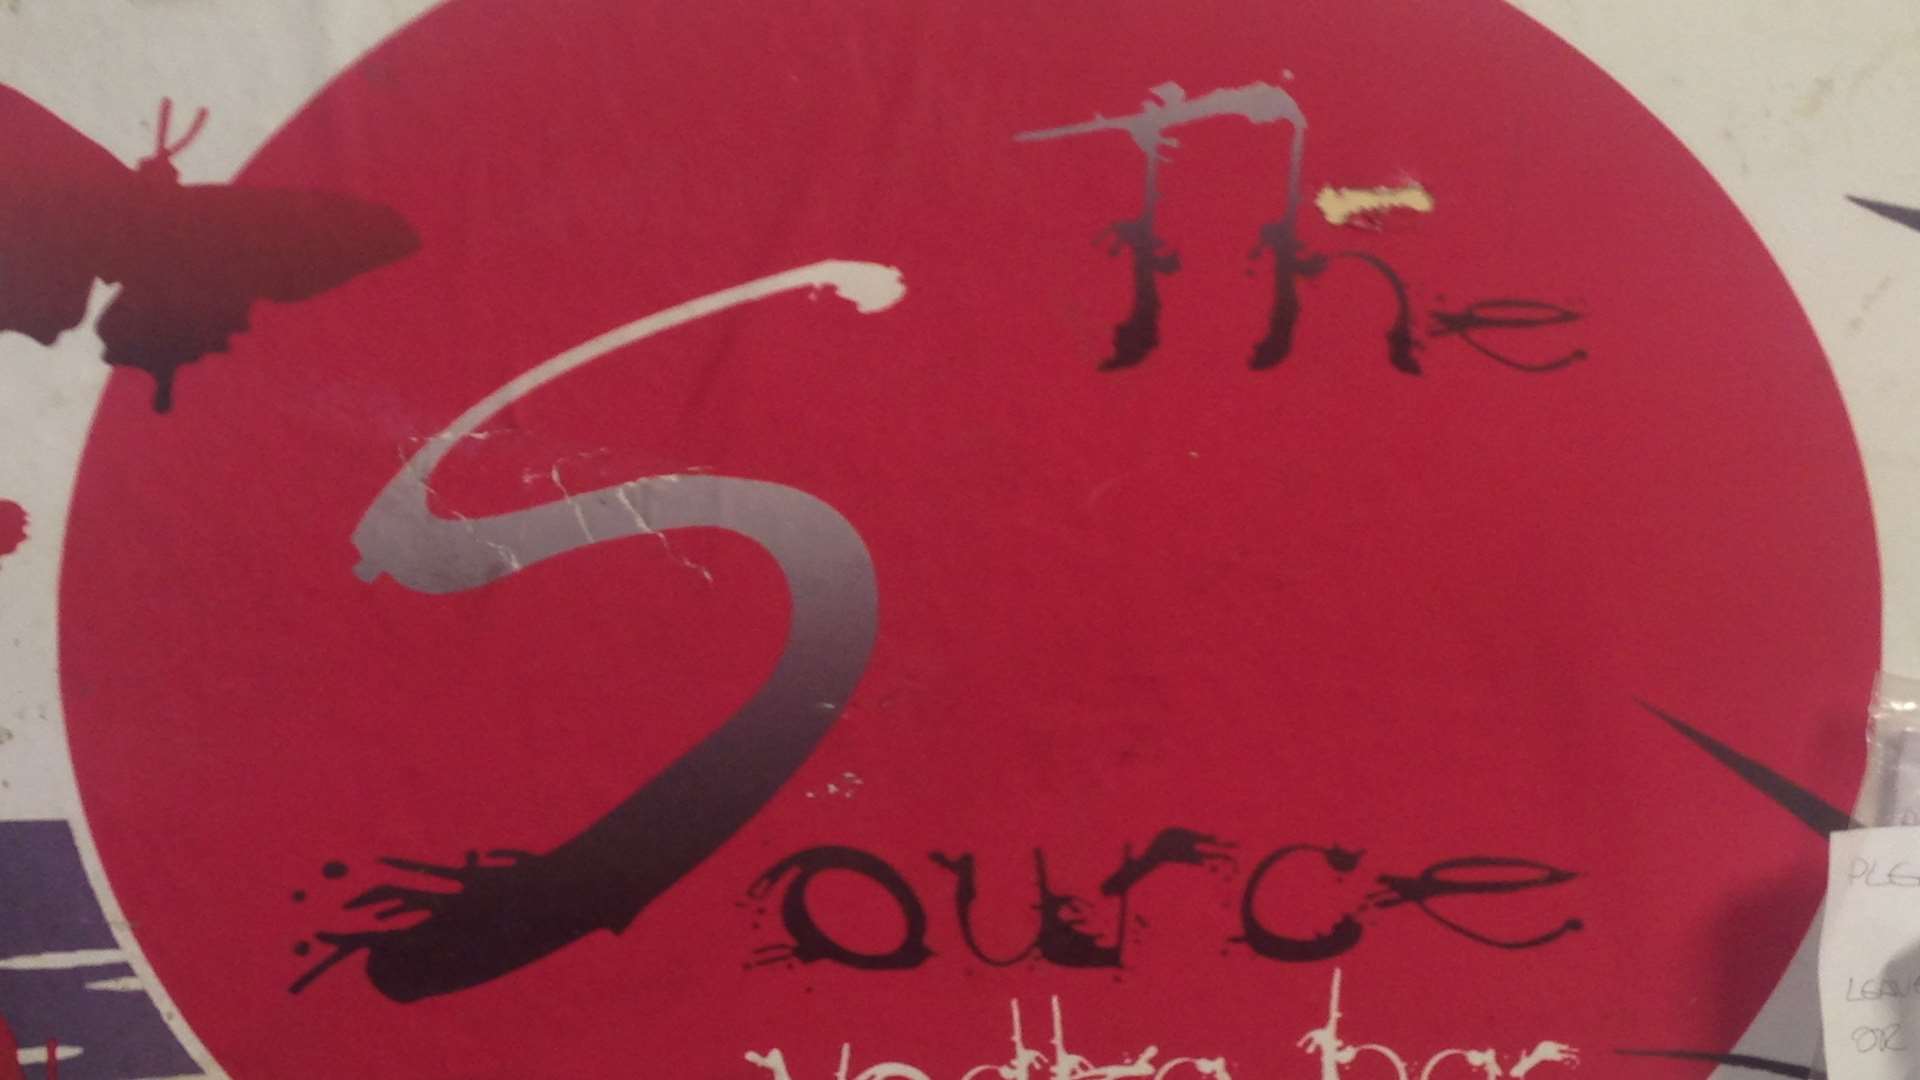 The Source Bar sign